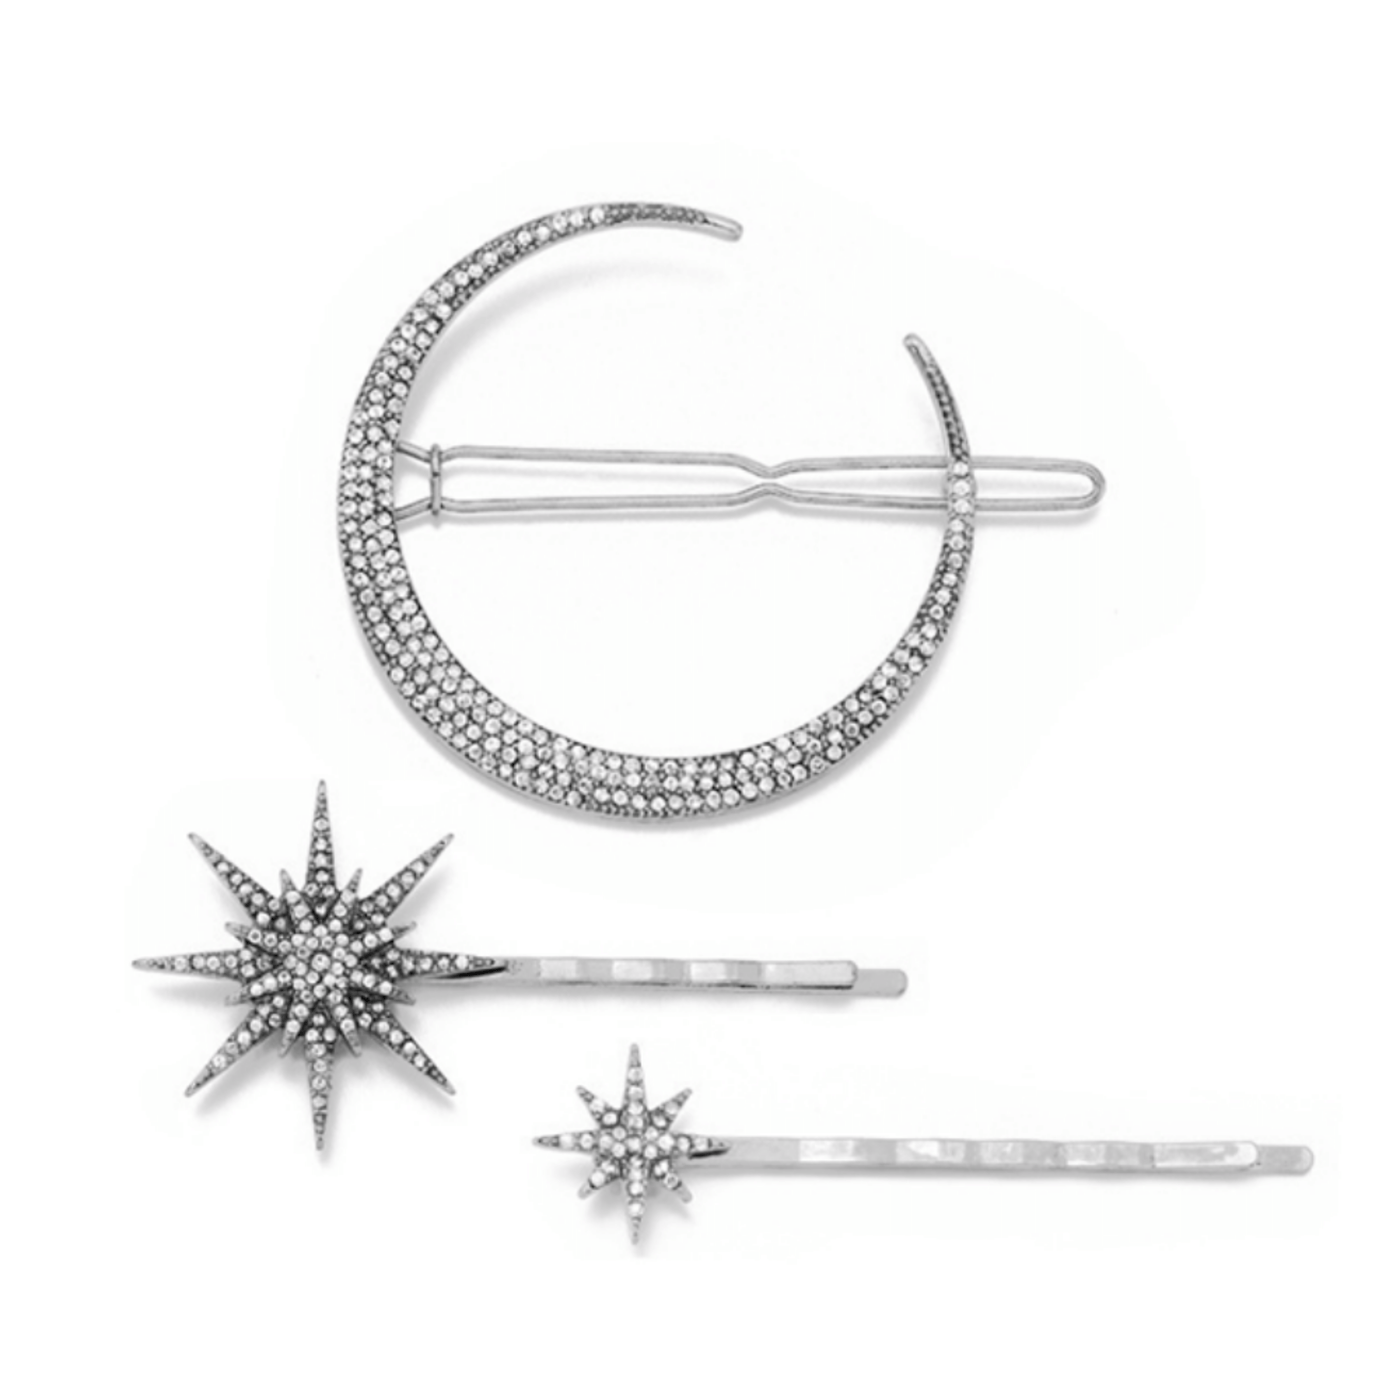 Crescent Moon and Star Hair Barrette Set Silver